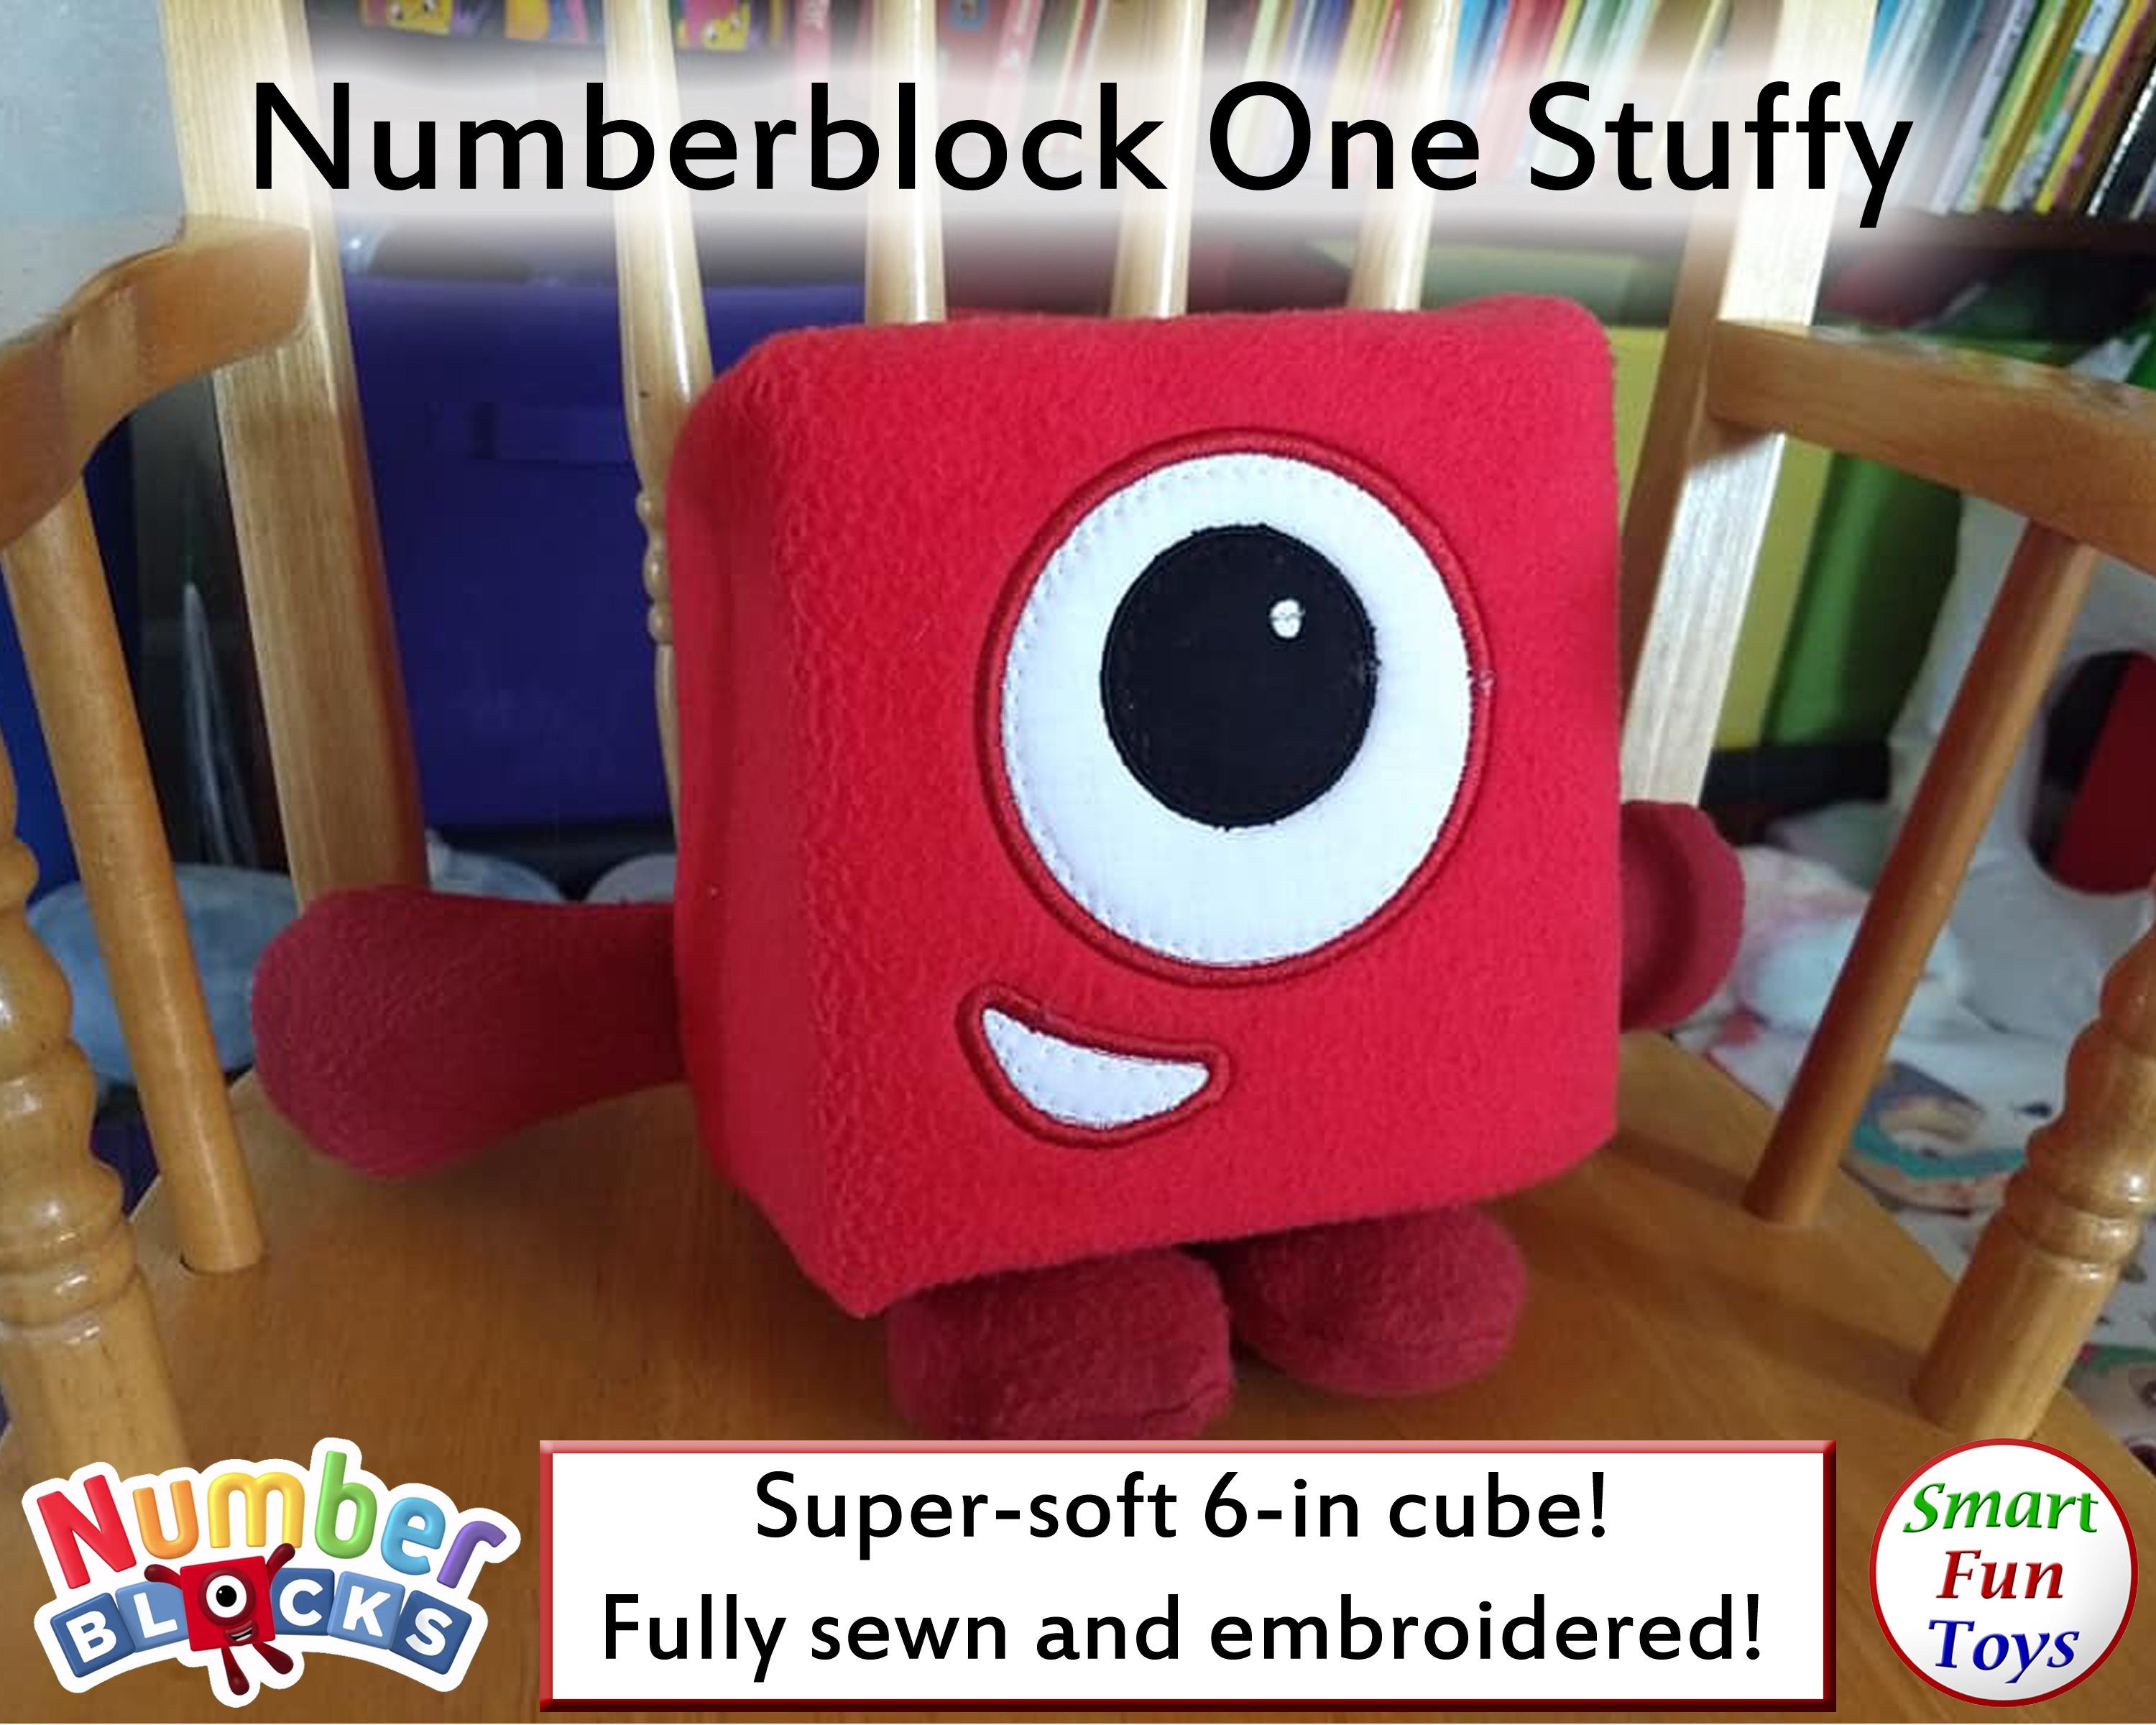 Numberblock Snap / Mathlink Cube Inserts, Increases Sticker Robustness by  Expanding Surface Area of Attachment 